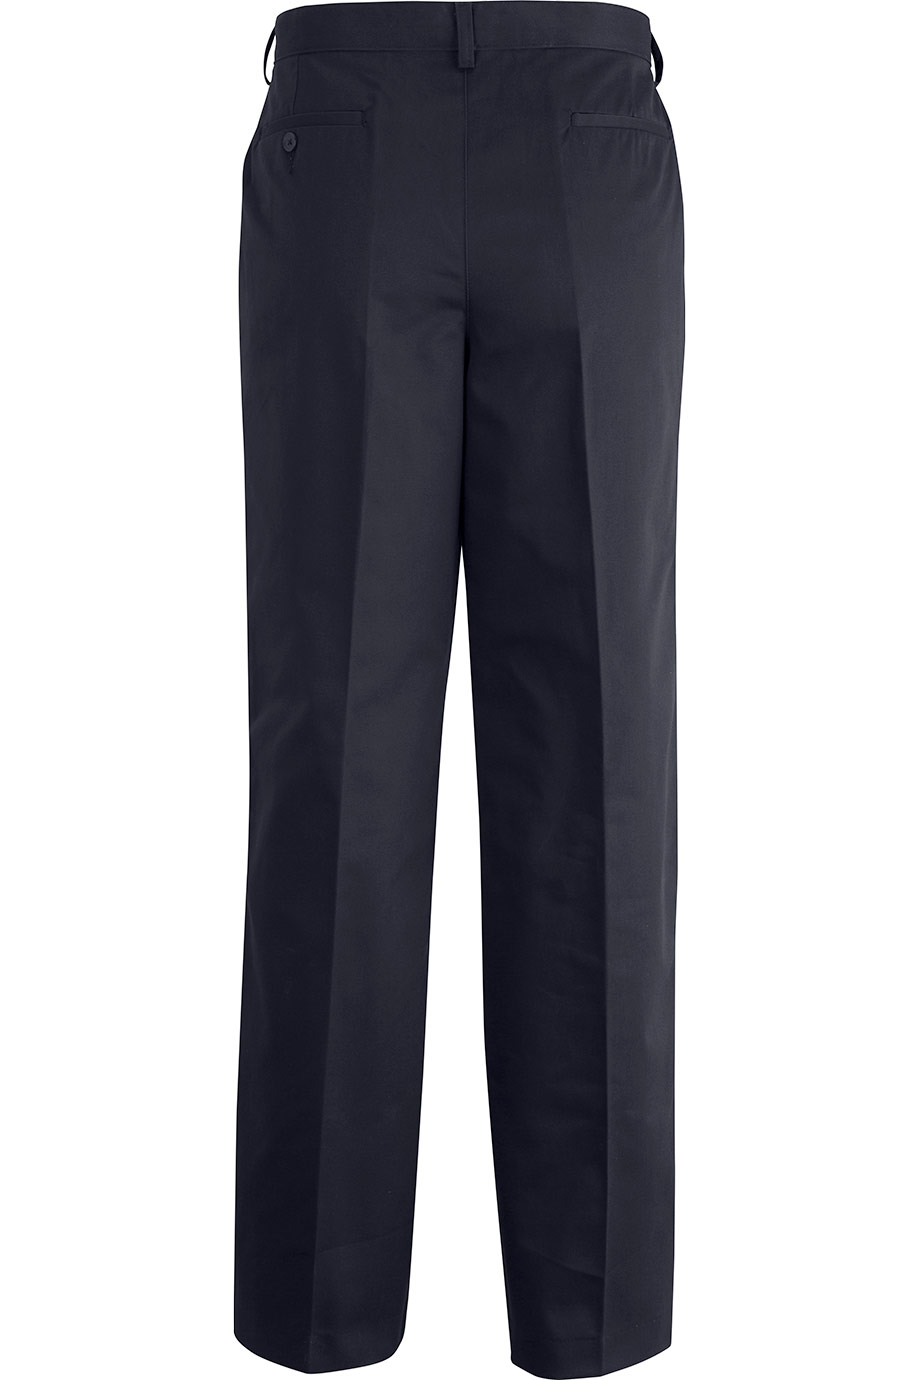 UTILITY CHINO PLEATED FRONT PANT | Edwards Garment